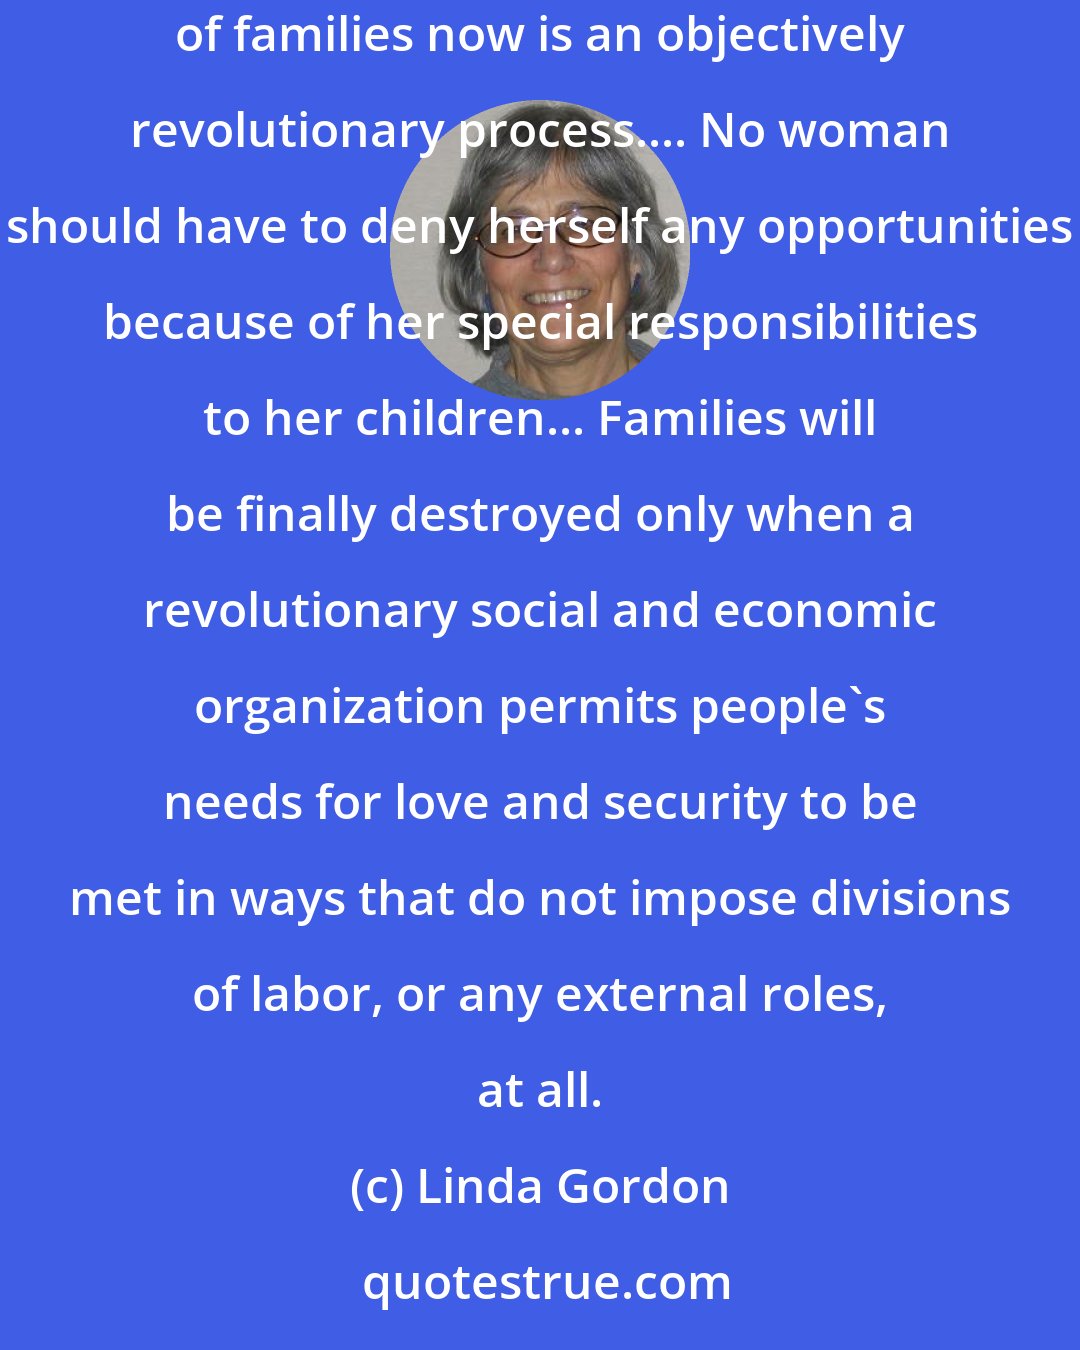 Linda Gordon: The nuclear family must be destroyed, and people must find better ways of living together.... Whatever its ultimate meaning, the break-up of families now is an objectively revolutionary process.... No woman should have to deny herself any opportunities because of her special responsibilities to her children... Families will be finally destroyed only when a revolutionary social and economic organization permits people's needs for love and security to be met in ways that do not impose divisions of labor, or any external roles, at all.